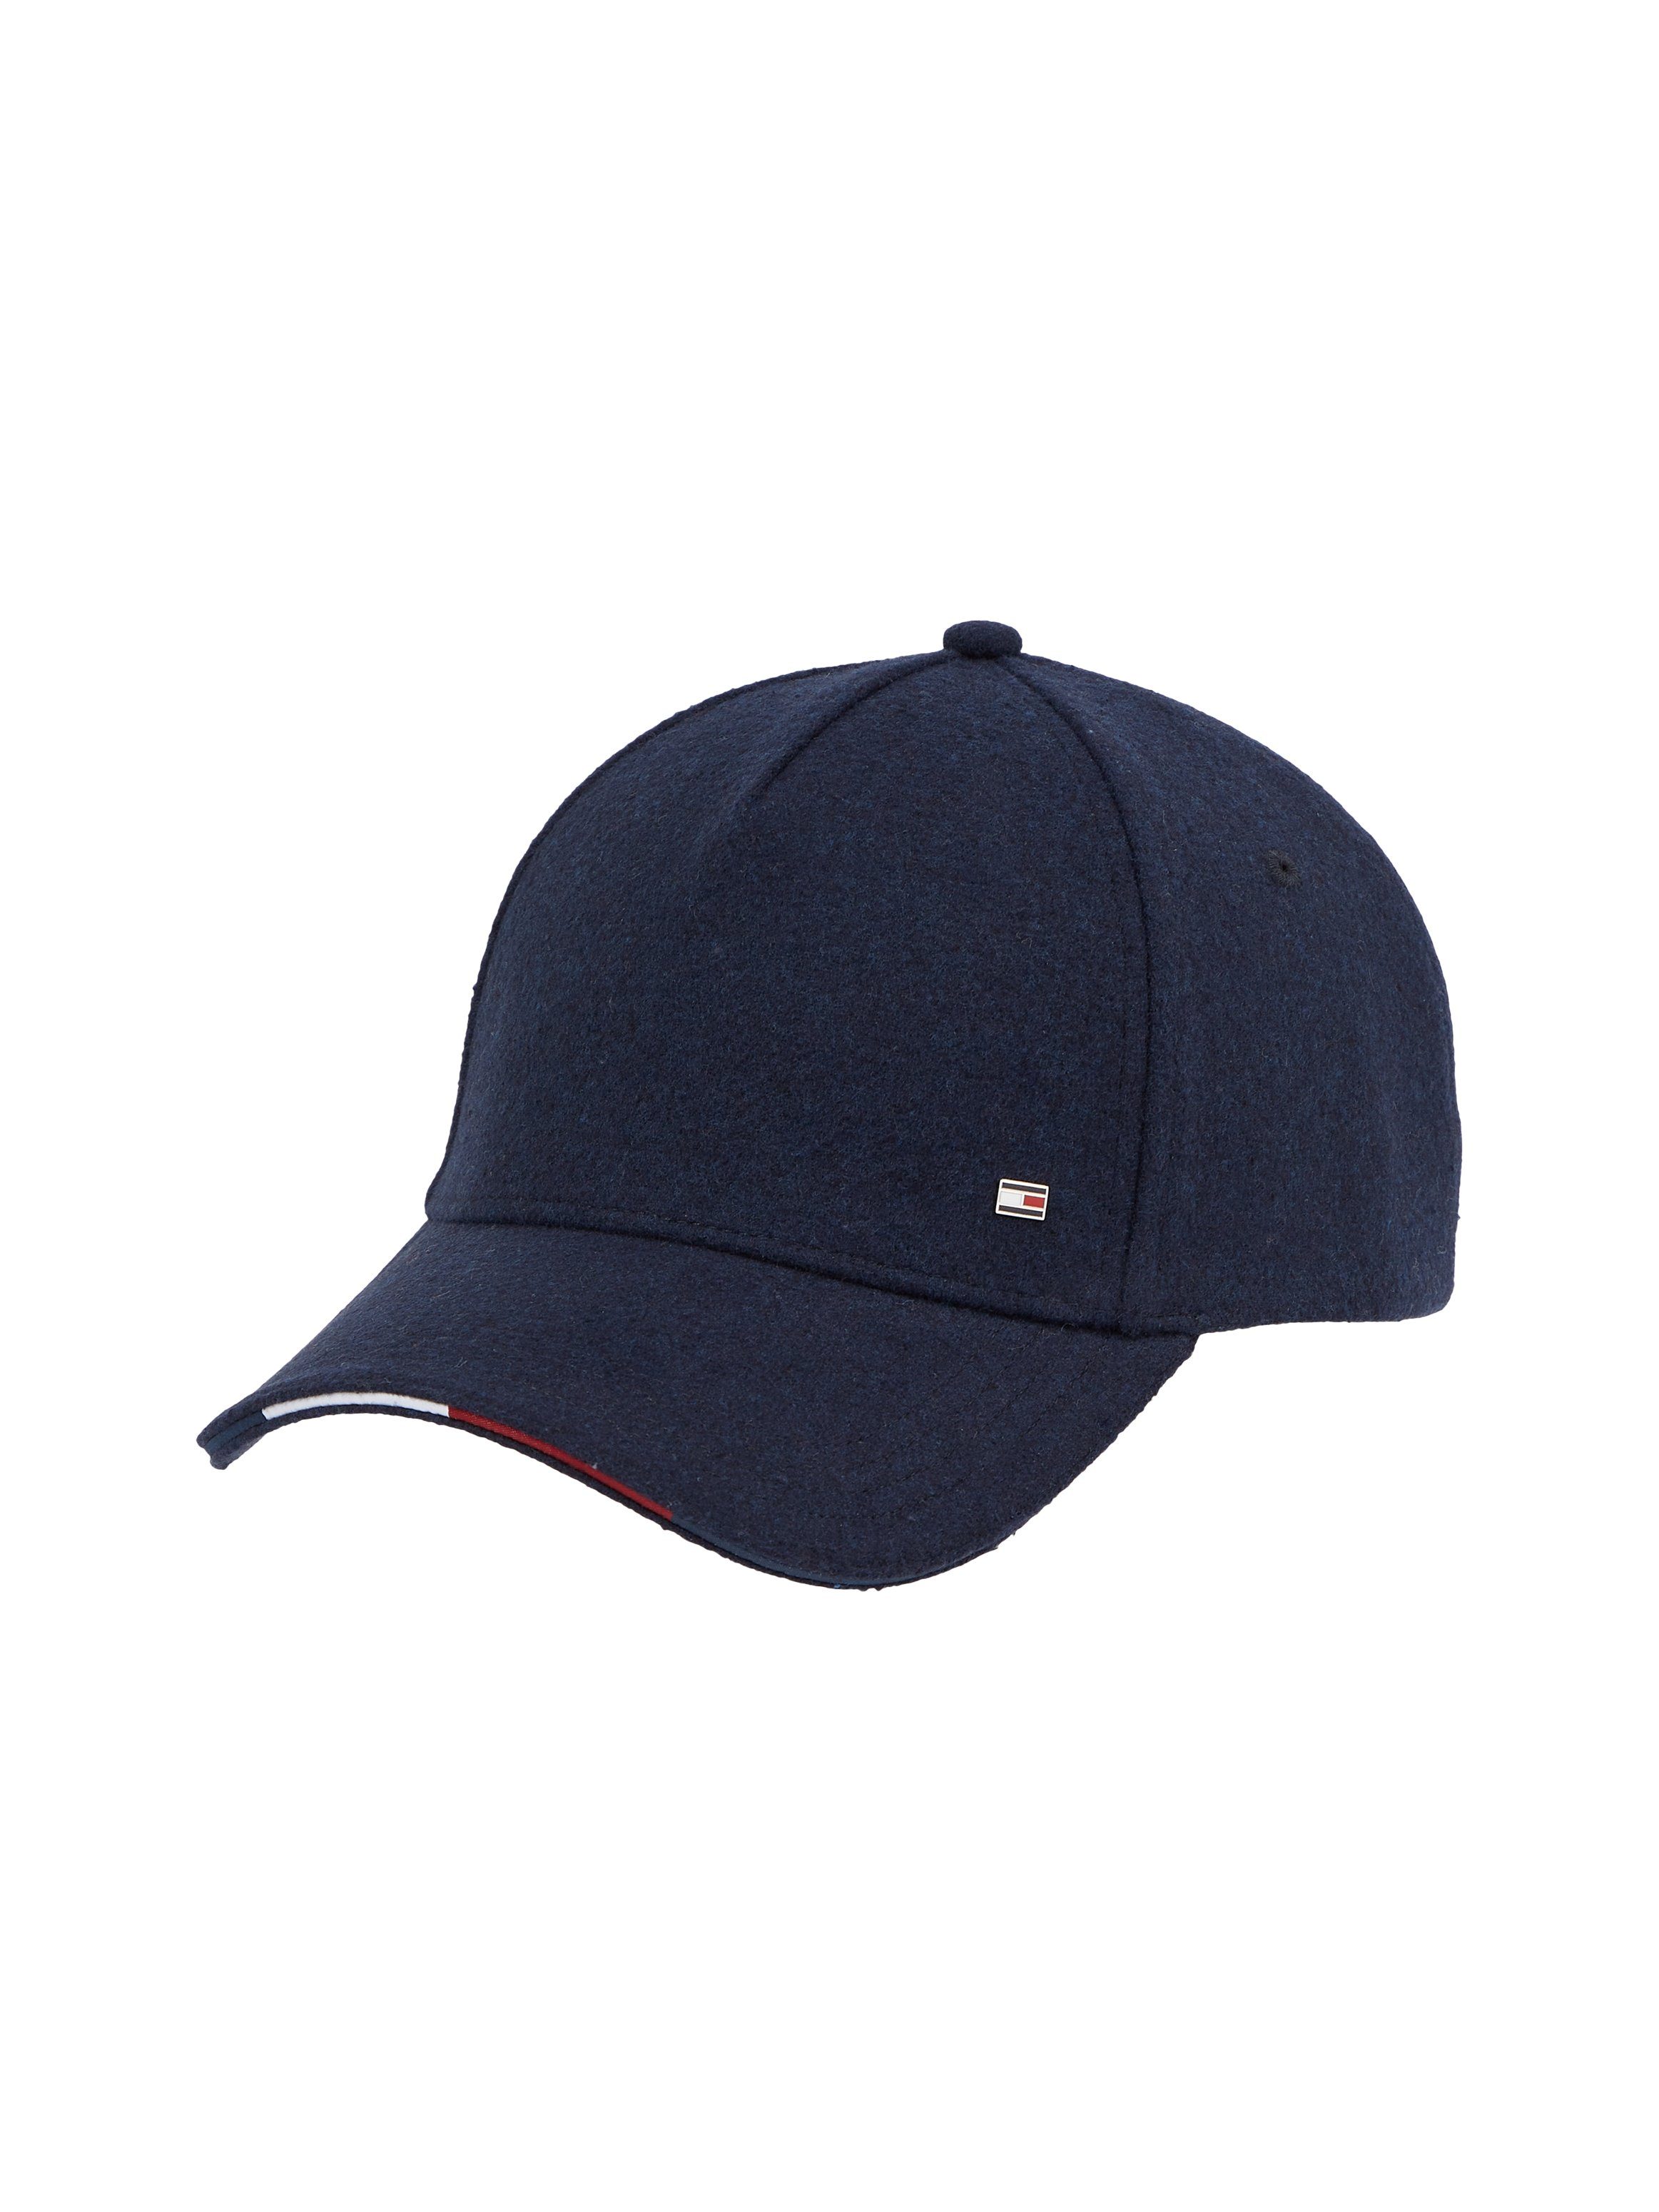 CAP Tommy-Tape Flag Tommy Hilfiger ELEVATED Cap und Blue Space mit Baseball CORPORATE